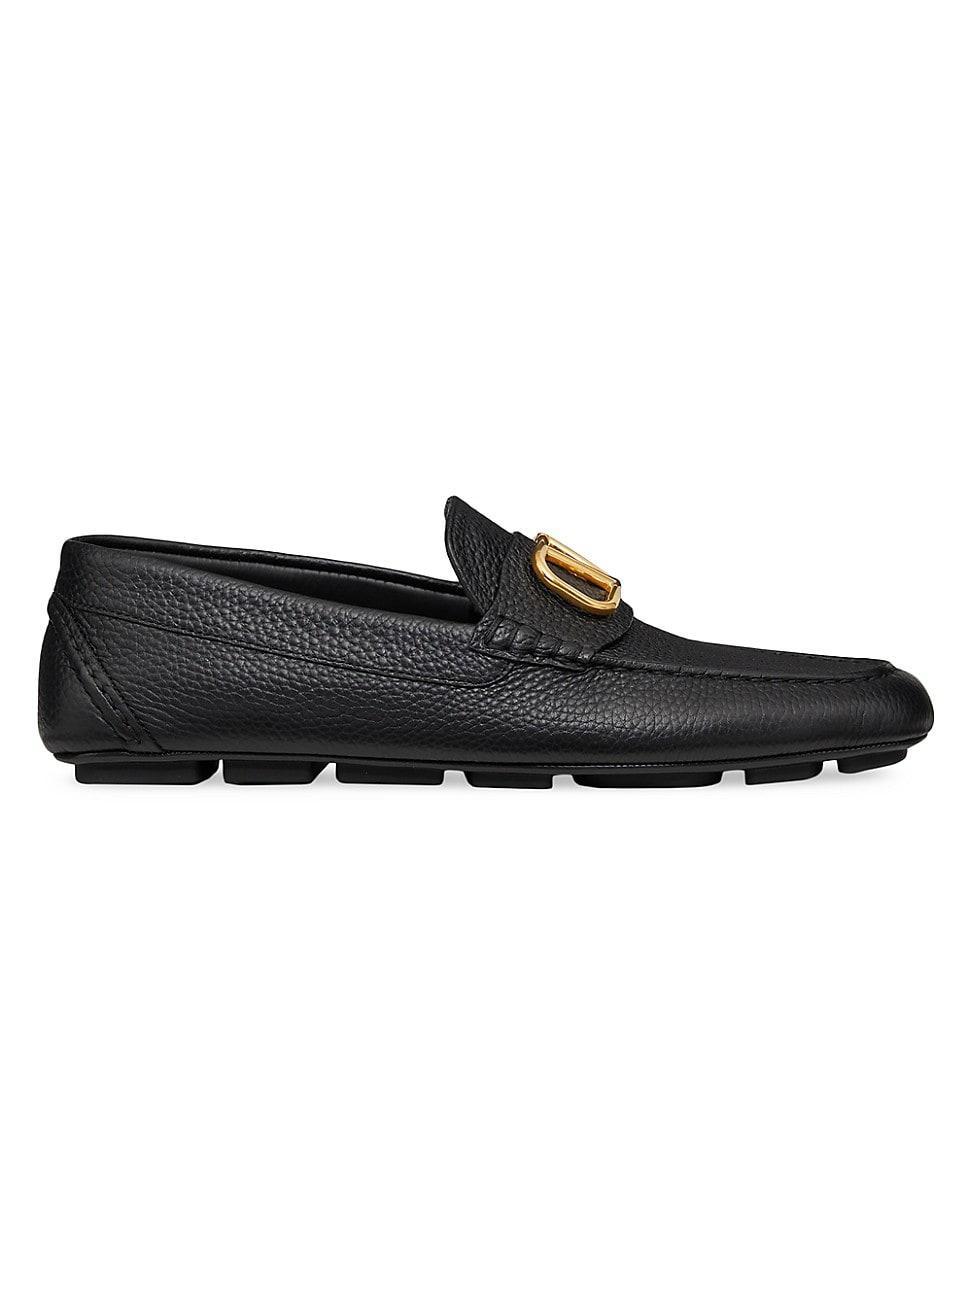 Mens Suede Loafers with Python Trim Product Image